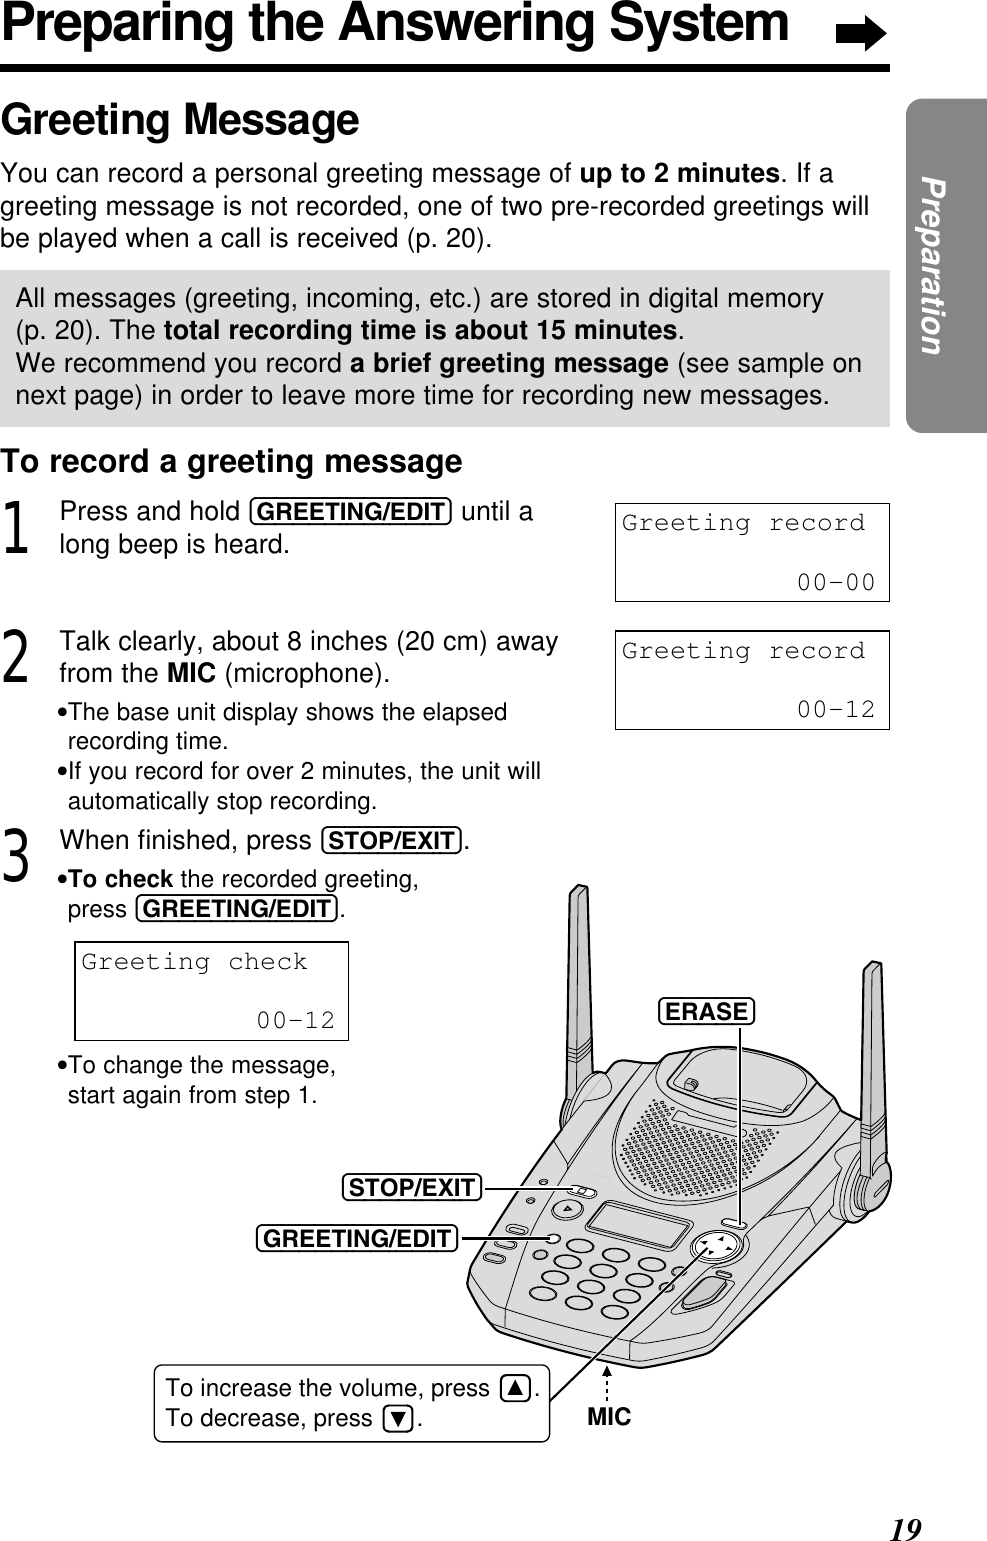 19PreparationPreparing the Answering SystemGreeting MessageYou can record a personal greeting message of up to 2 minutes. If agreeting message is not recorded, one of two pre-recorded greetings willbe played when a call is received (p. 20).All messages (greeting, incoming, etc.) are stored in digital memory (p. 20). The total recording time is about 15 minutes. We recommend you record a brief greeting message (see sample onnext page) in order to leave more time for recording new messages.To record a greeting message1Press and hold (GREETING/EDIT) until along beep is heard.2Talk clearly, about 8 inches (20 cm) awayfrom the MIC (microphone).•The base unit display shows the elapsedrecording time.•If you record for over 2 minutes, the unit willautomatically stop recording.3When ﬁnished, press (STOP/EXIT).•To check the recorded greeting, press (GREETING/EDIT).•To change the message, start again from step 1.Greeting record00-00Greeting record00-12Greeting check00-12MICTo increase the volume, press .To decrease, press .(GREETING/EDIT)(STOP/EXIT)(ERASE)